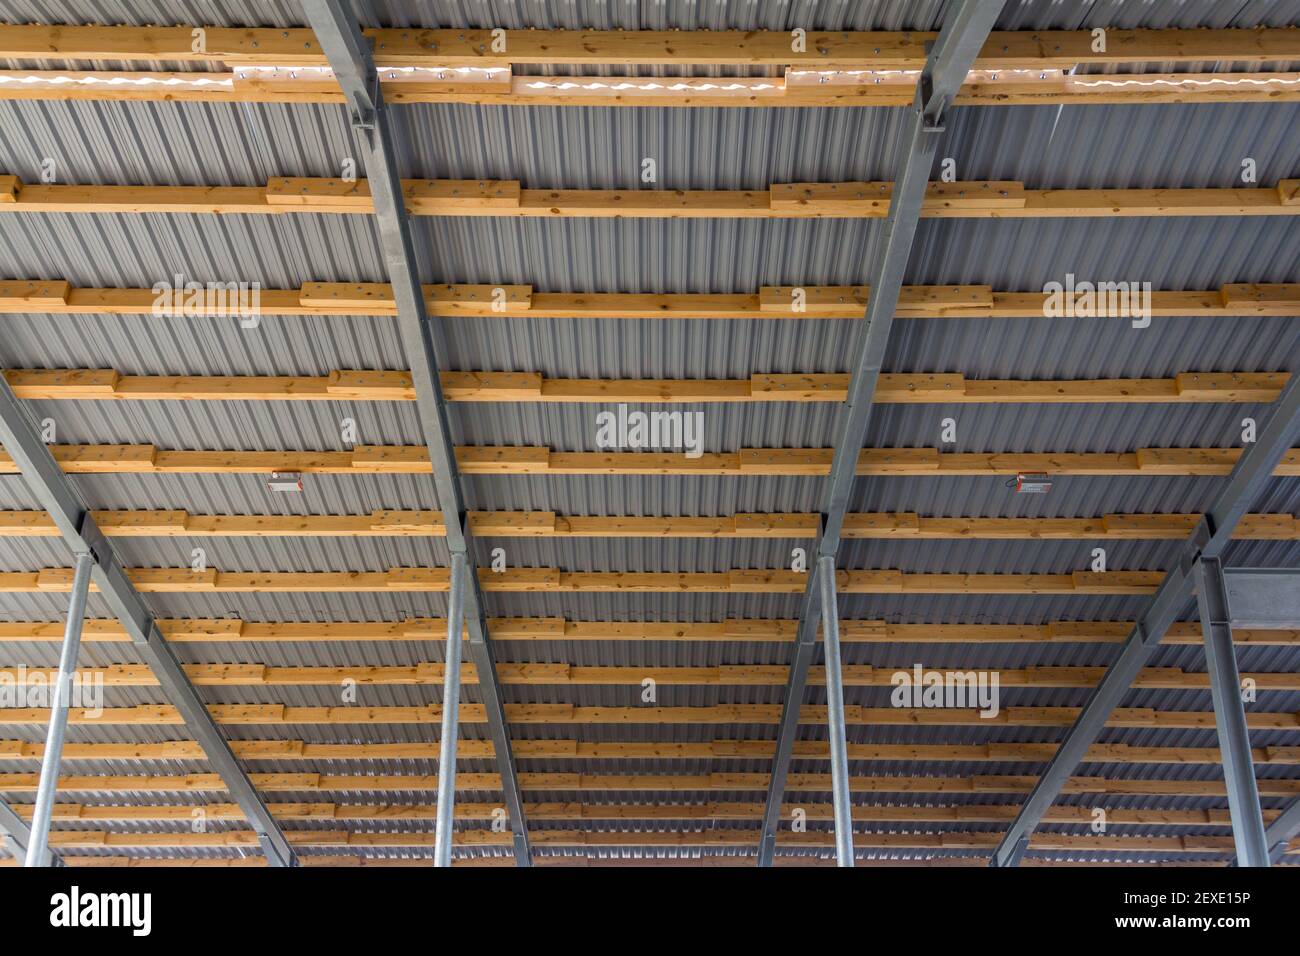 The Roof Structure Of A Large Hangar Consists Of A Steel Frame And Timber Floor Joists Construction Phase Of A Large Complex On A Farm Stock Photo Alamy